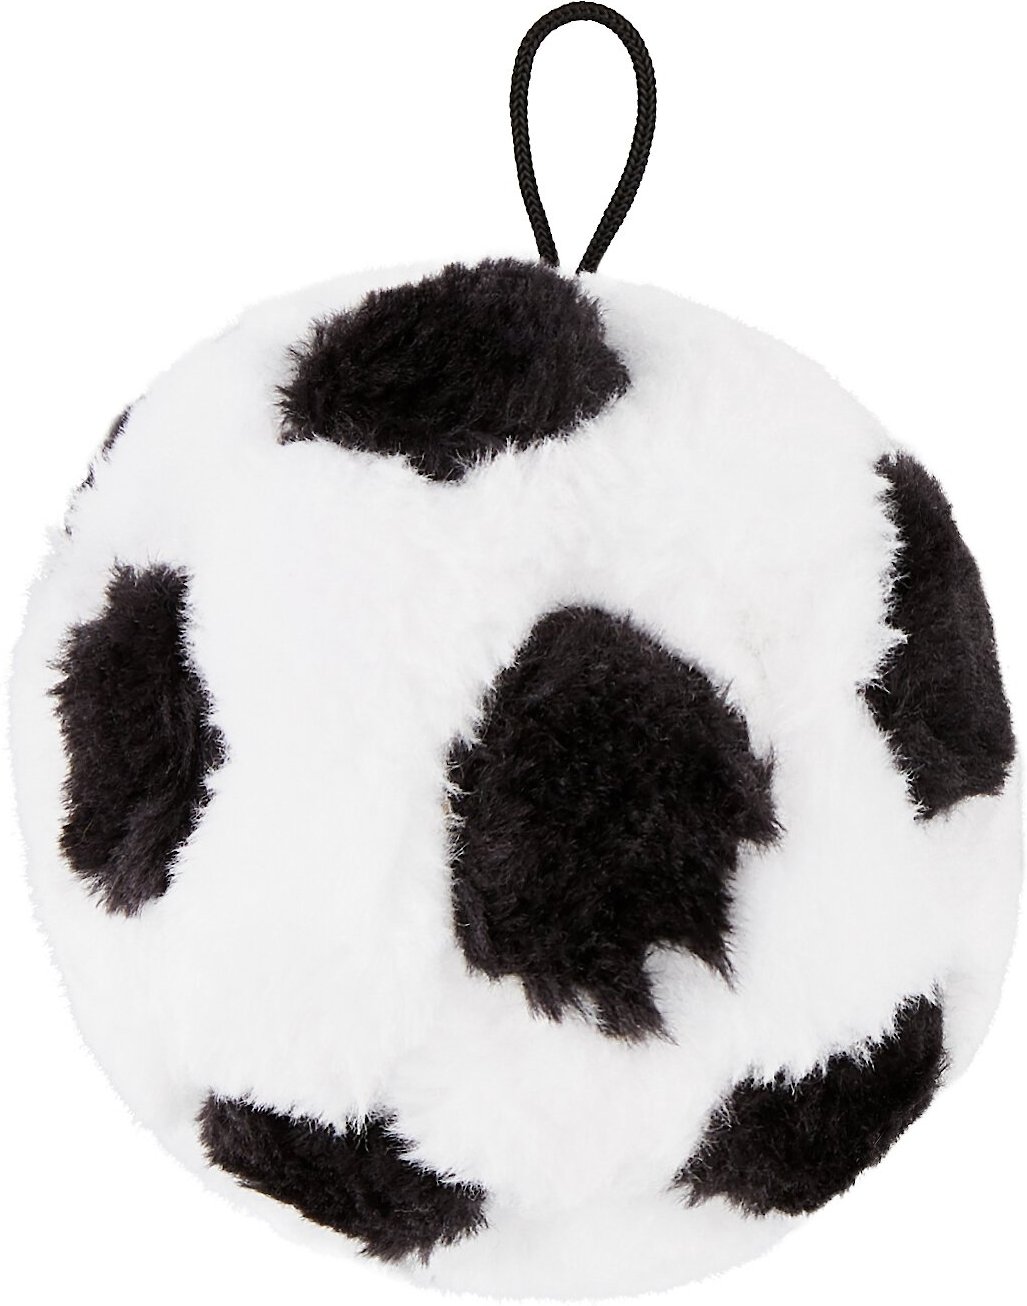 Ethical Pet Soccer Ball Squeaky Plush Dog Toy